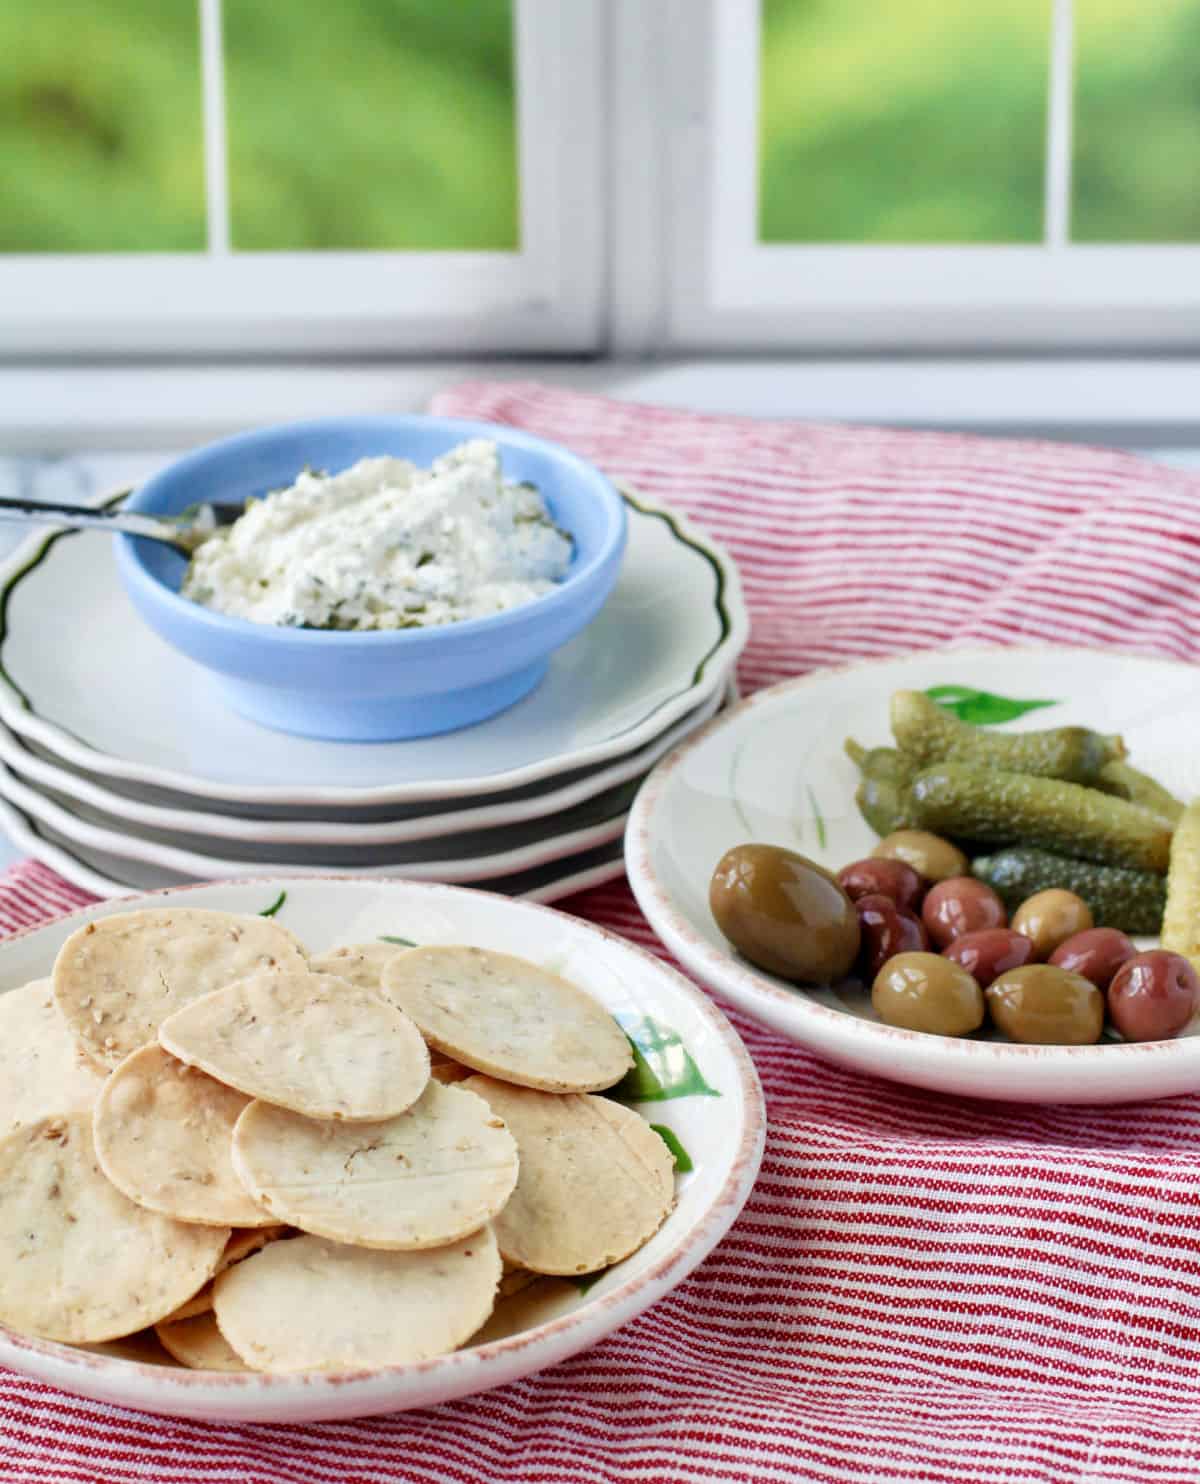 Rice and Almond Thin Crackers with various appetizers.